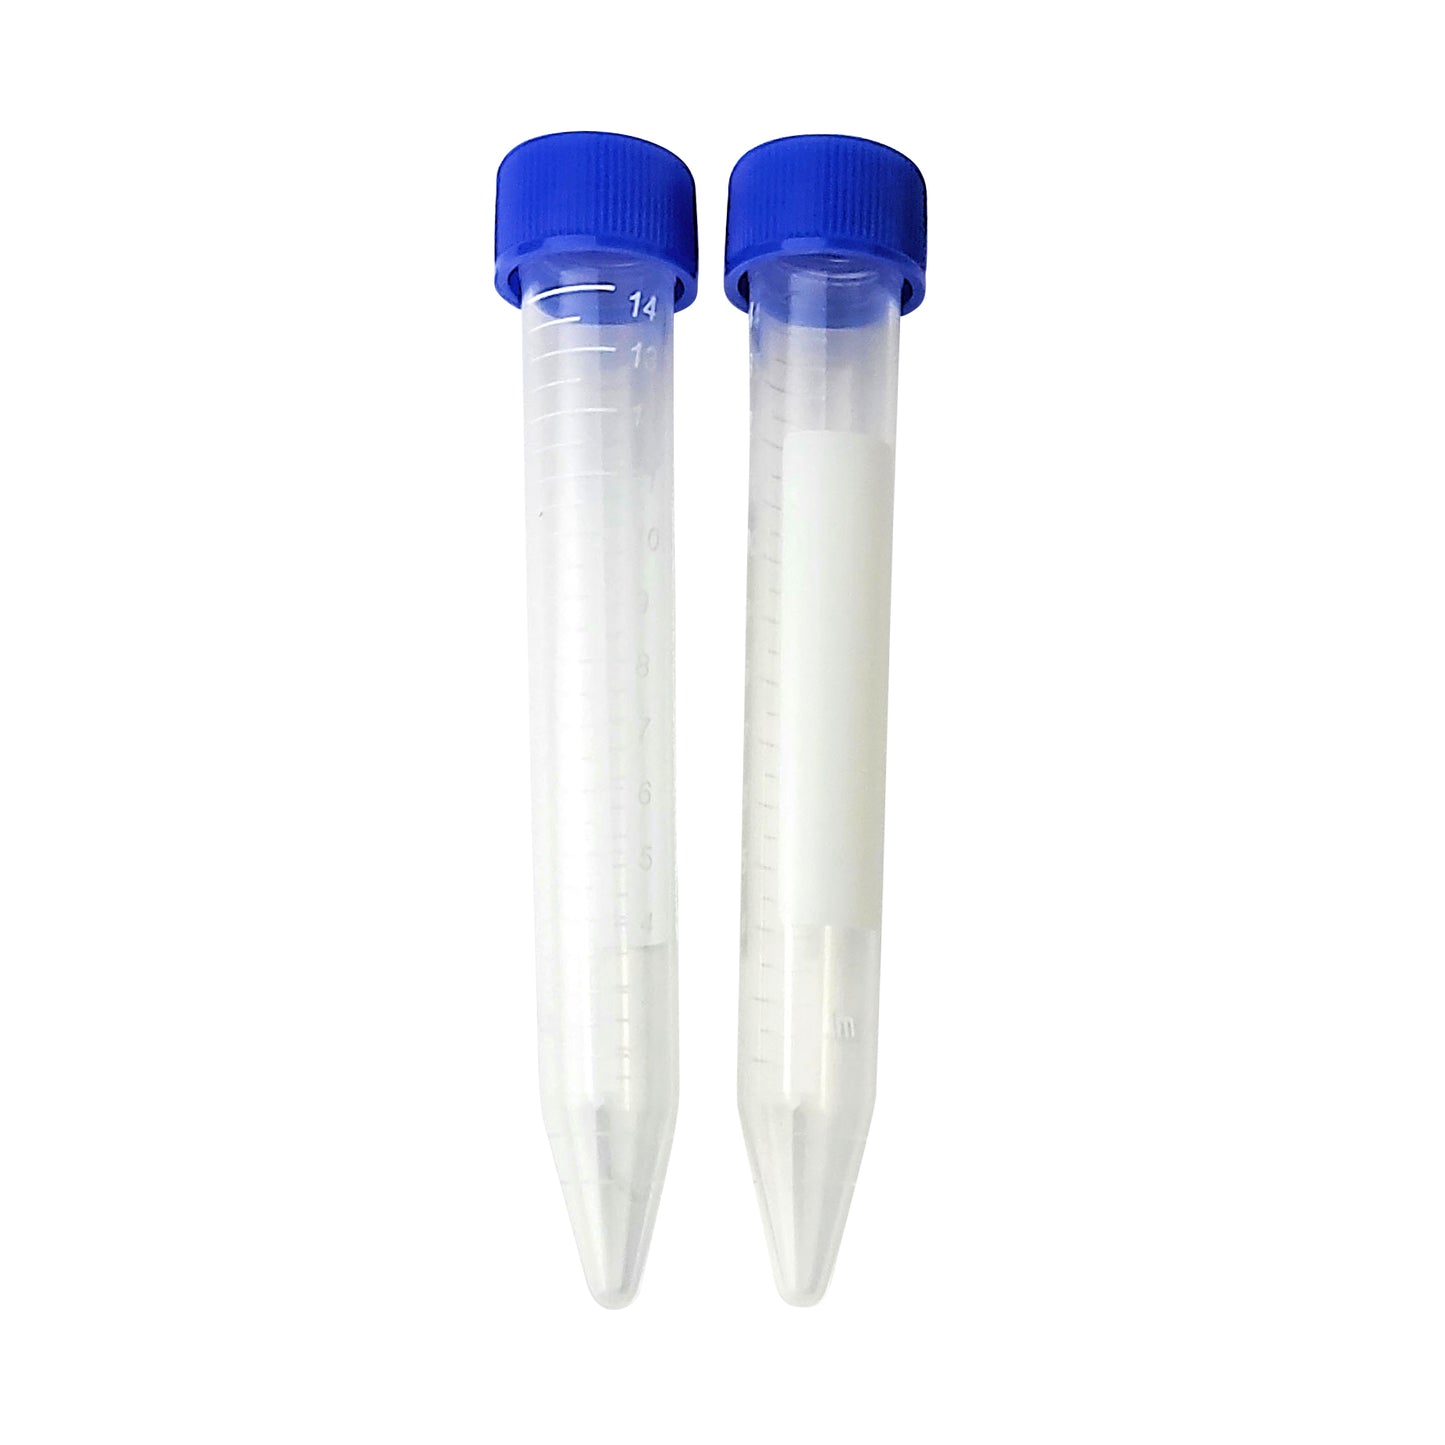 15 ml Conical Centrifuge Tube, Sterile, Rack Packed (Case of 500)